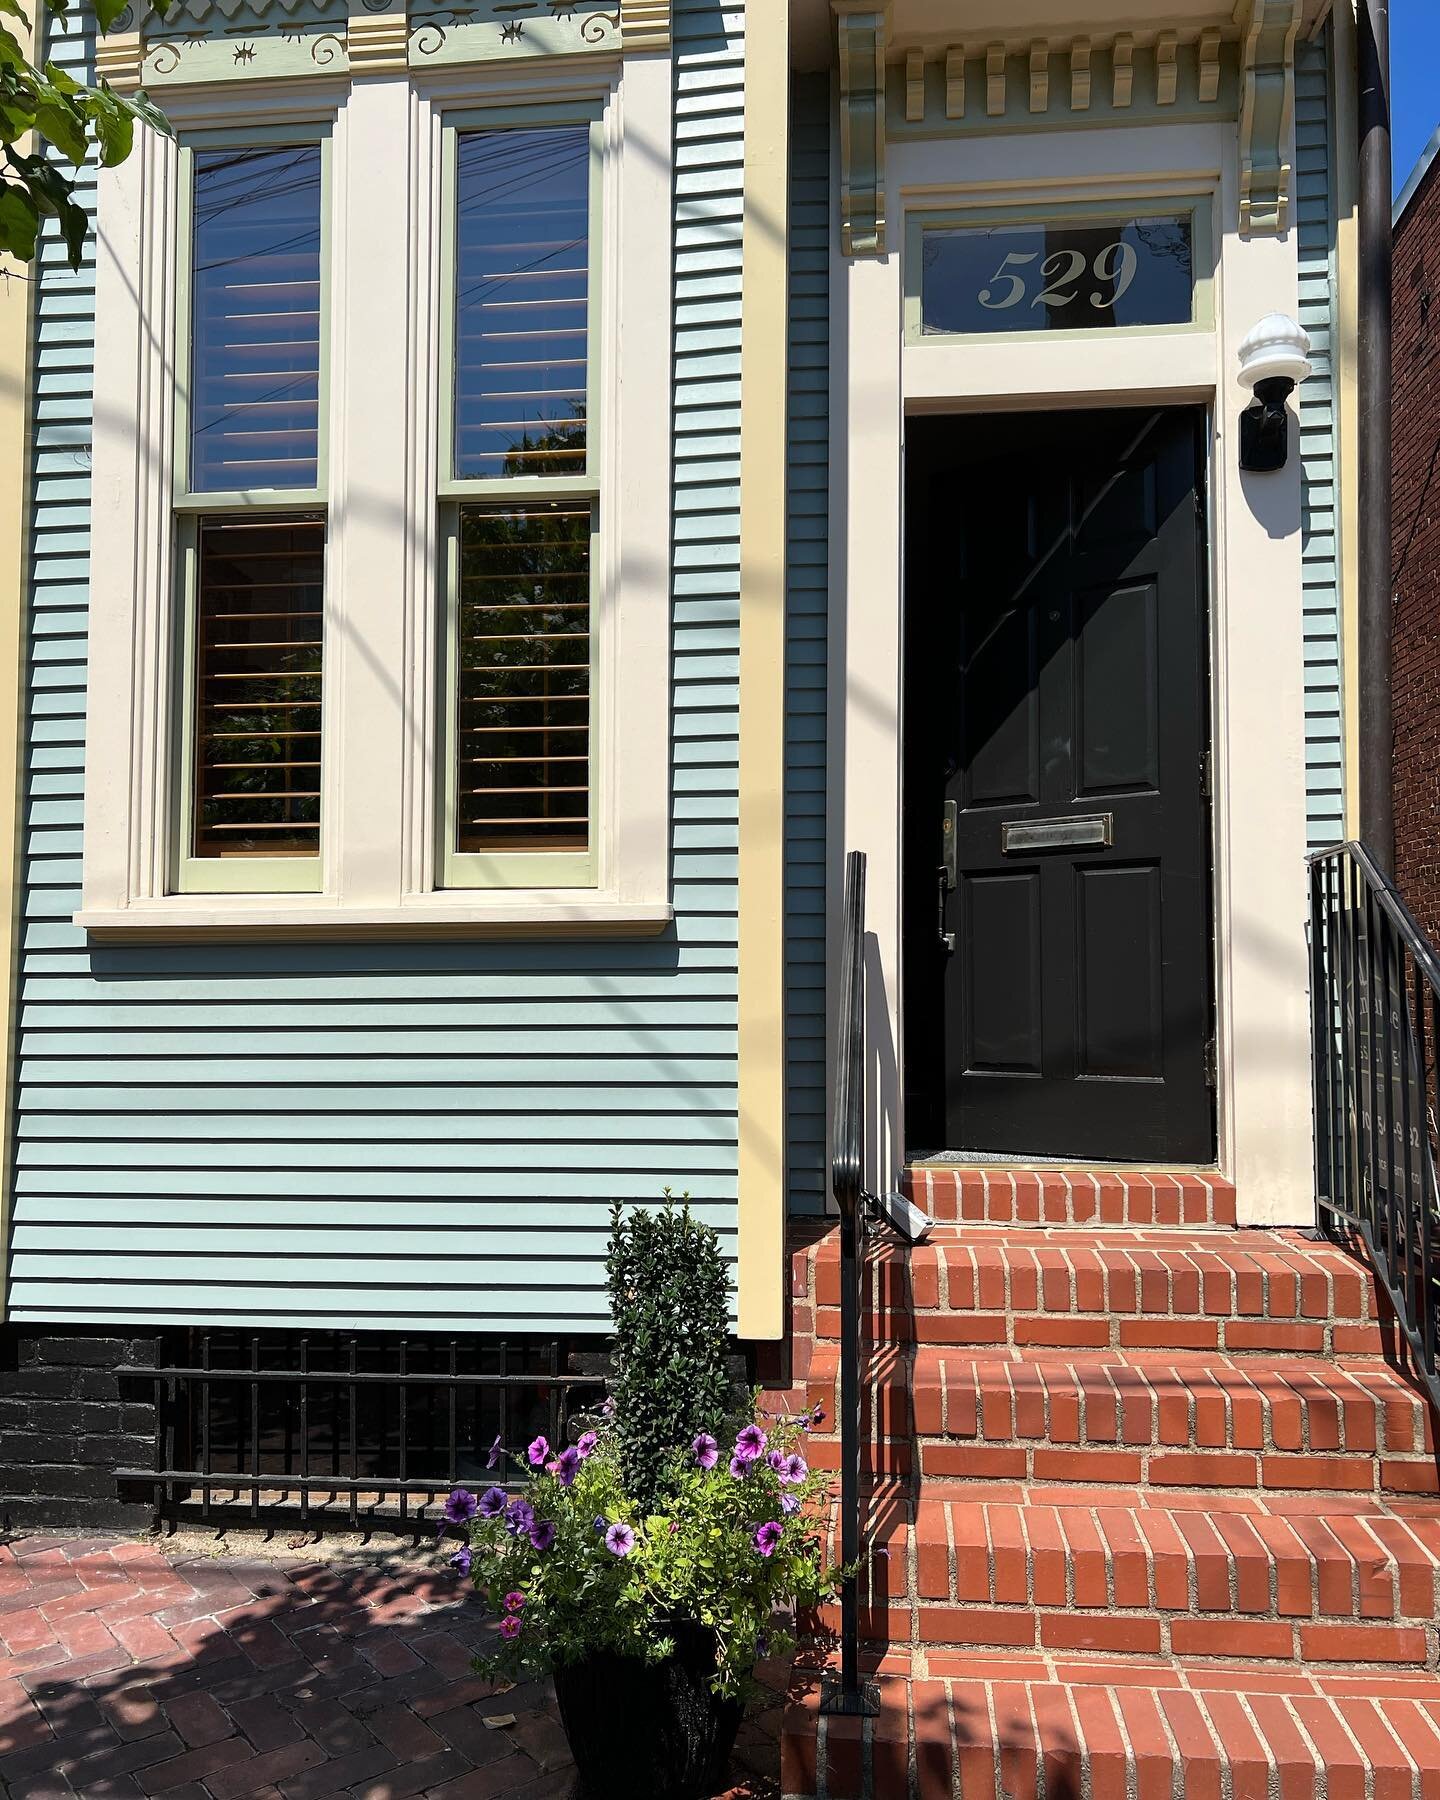 I will be at this open house today&hellip; fabulous home in the southeast quadrant of Old Town! Please come and check it out! 
529 South Fairfax Street, 2-4
#mcenearneyassociates #oldtownalexandria